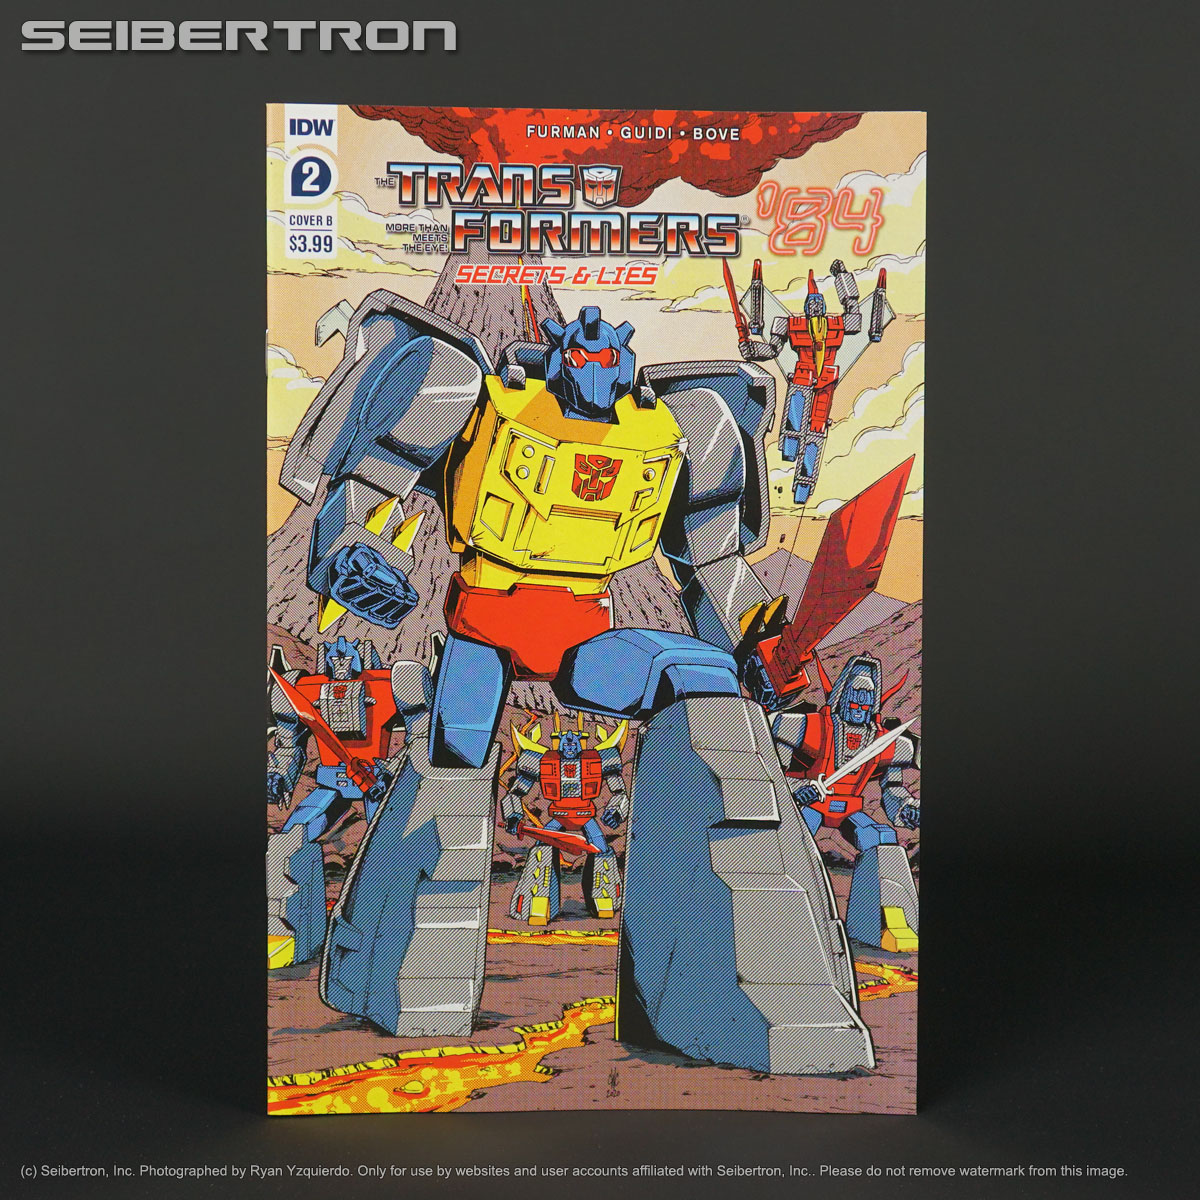 Transformers News: Transformers Legacy Evo, Super7 Unicron, BotBots Series 6, New Comics and more at Seibertron Store